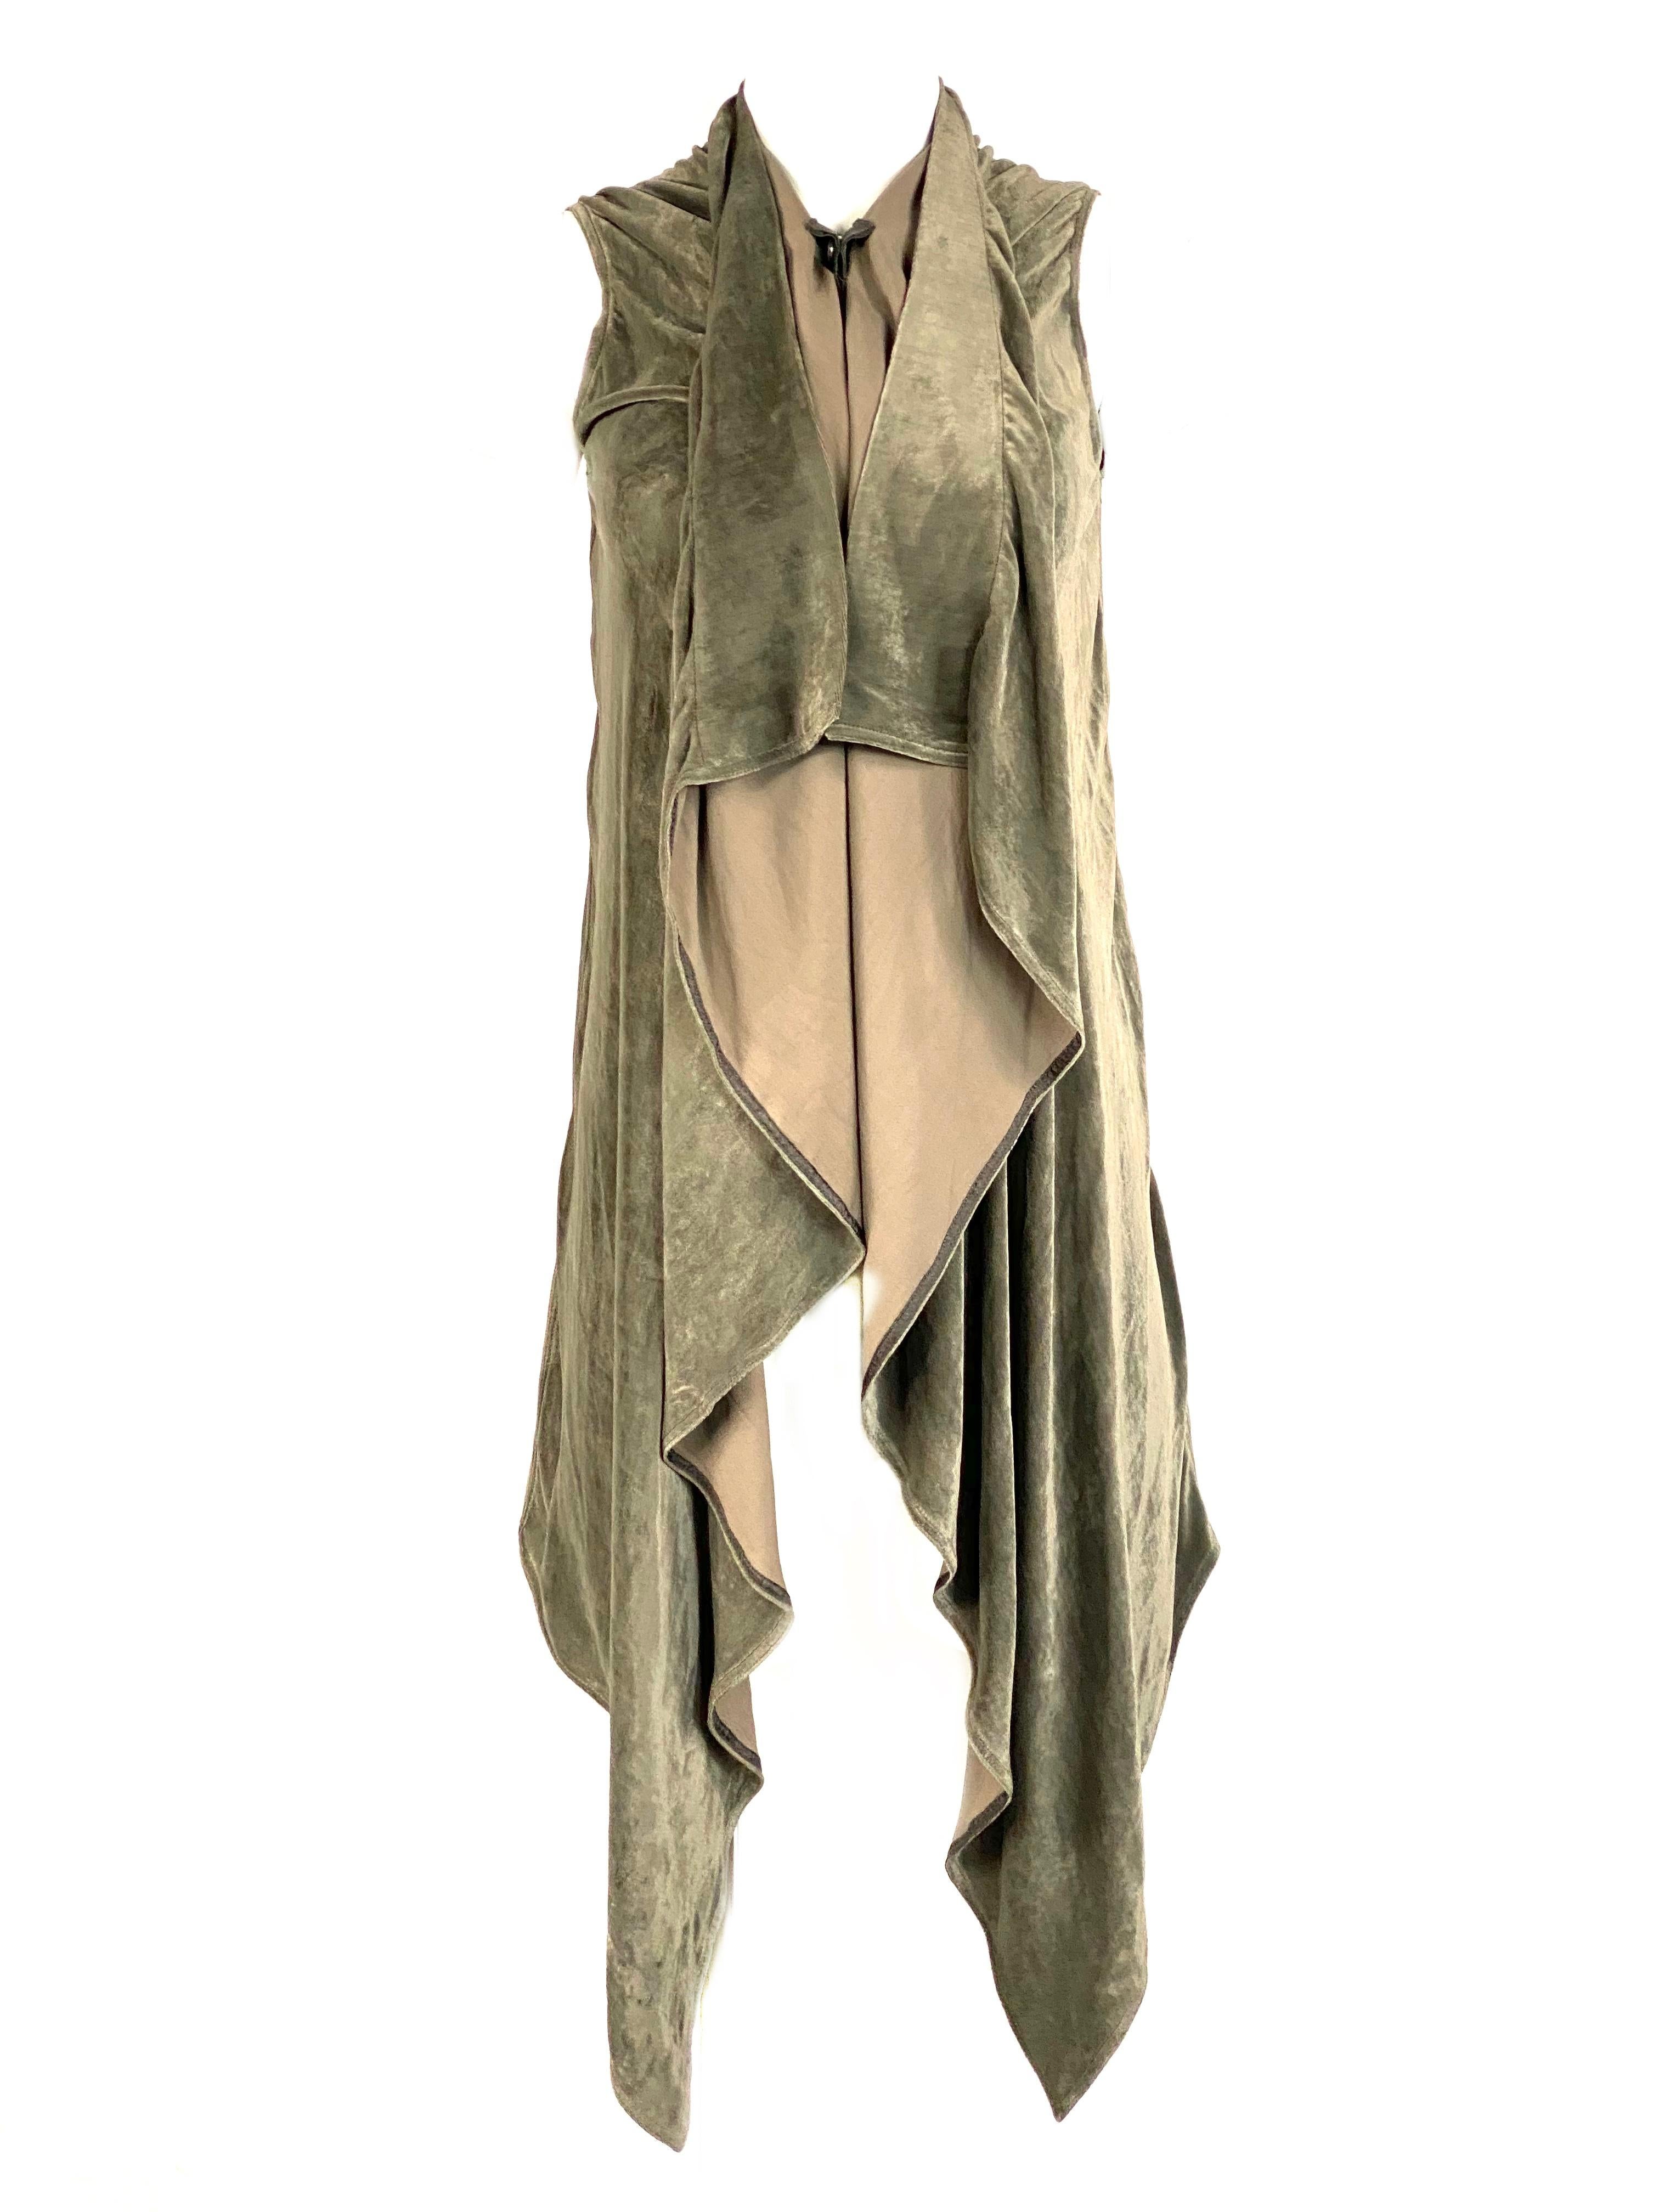 Rick Owens Green Olive Darkdust Velvet Vest Size 38Product details:
Size 38
Featuring front three click in metal buttons closure (please see the pictures for the details)
Long front measures 46”L
Short back measures 27”L
Made in Italy

